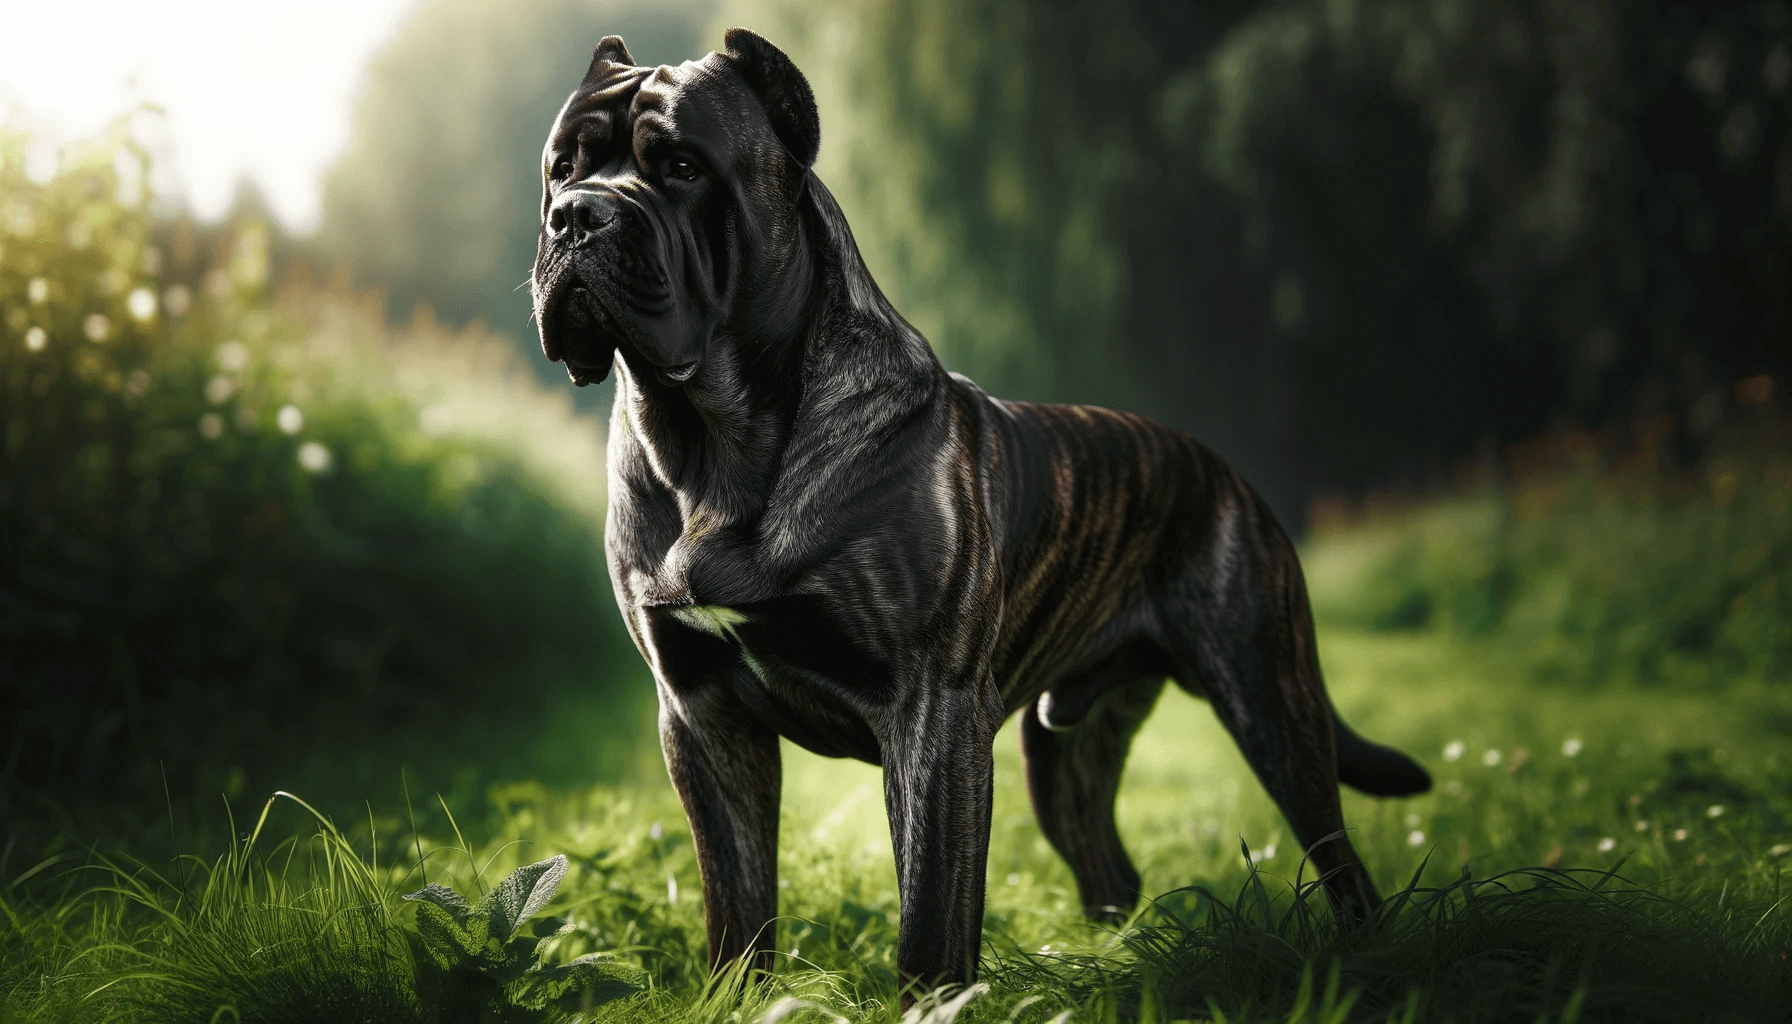 A sturdy brindle Cane Corso standing attentively in a grassy field. The sunlight accentuates its muscular frame, highlighting the distinctive brindle coat.